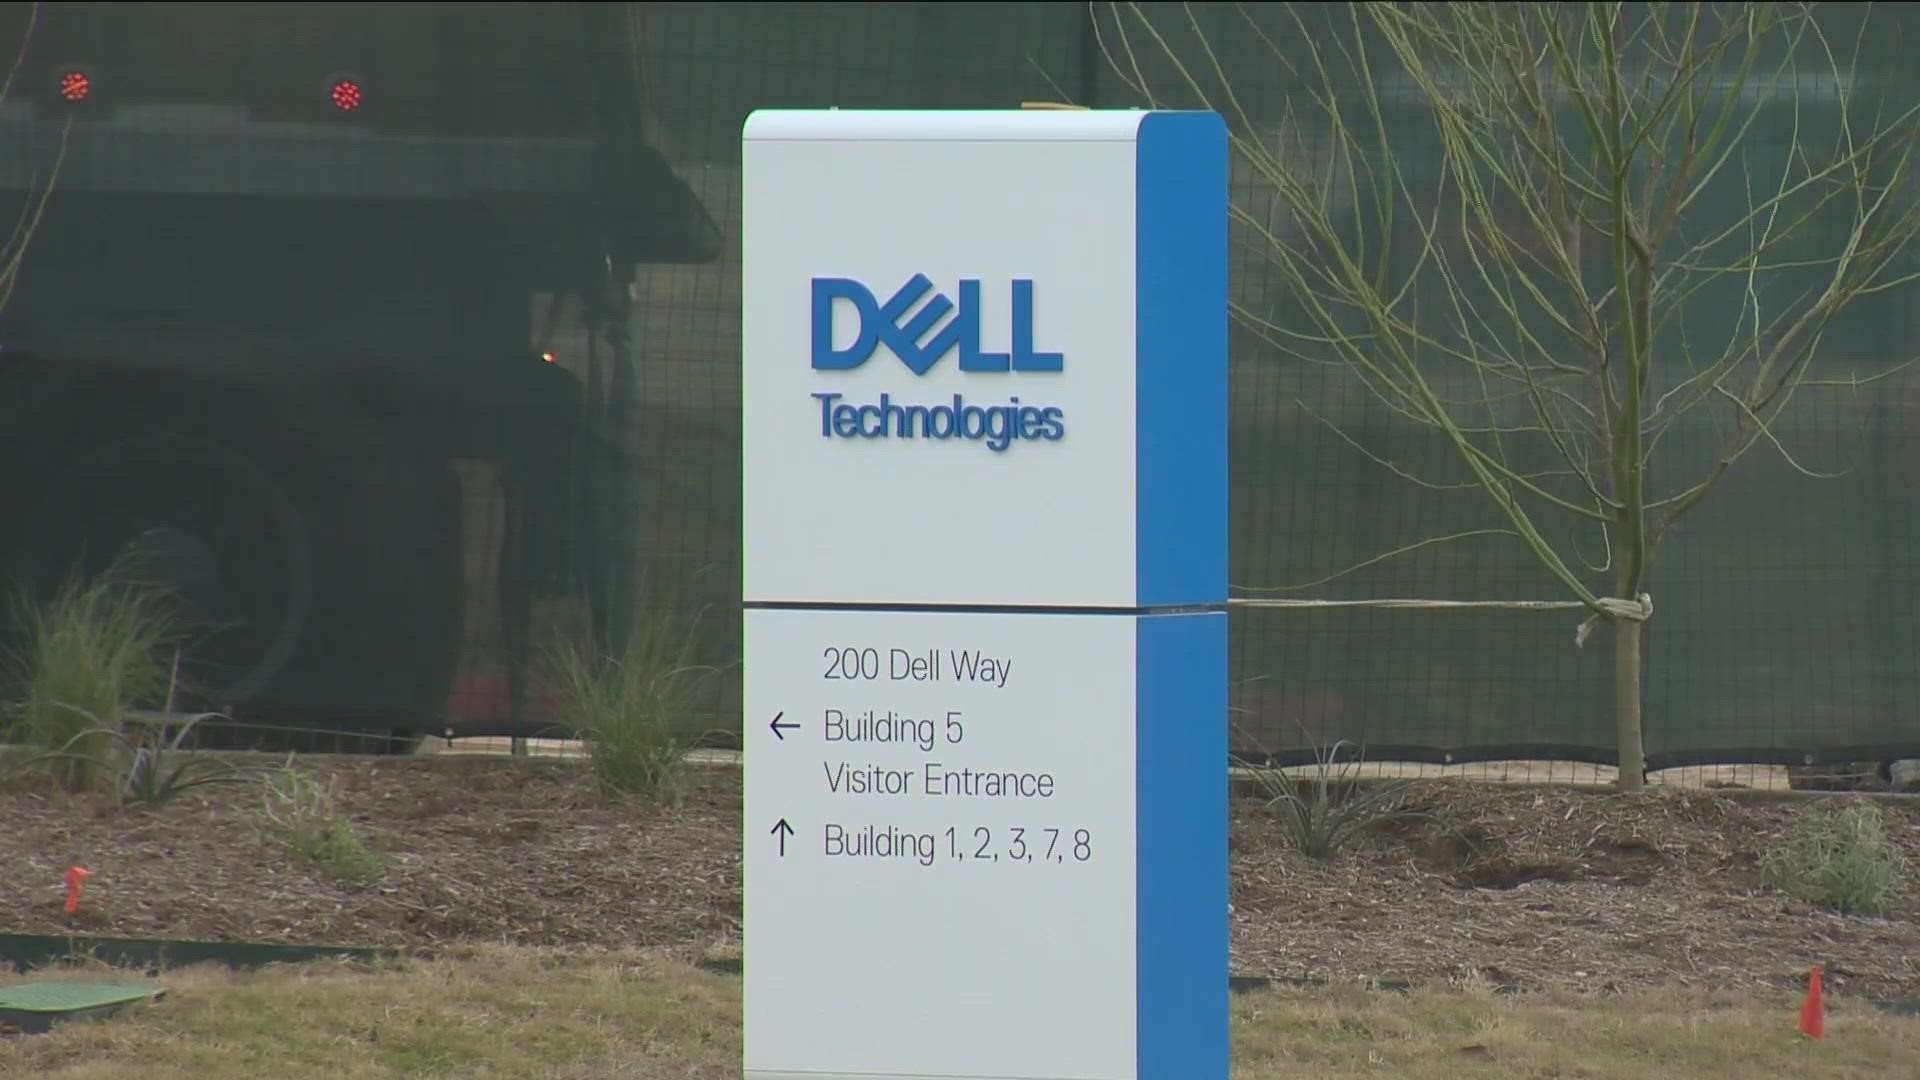 Leaders with Dell, which has offices in Central Texas, say the "challenging global economic environment" is the reason behind their most recent round of layoffs.